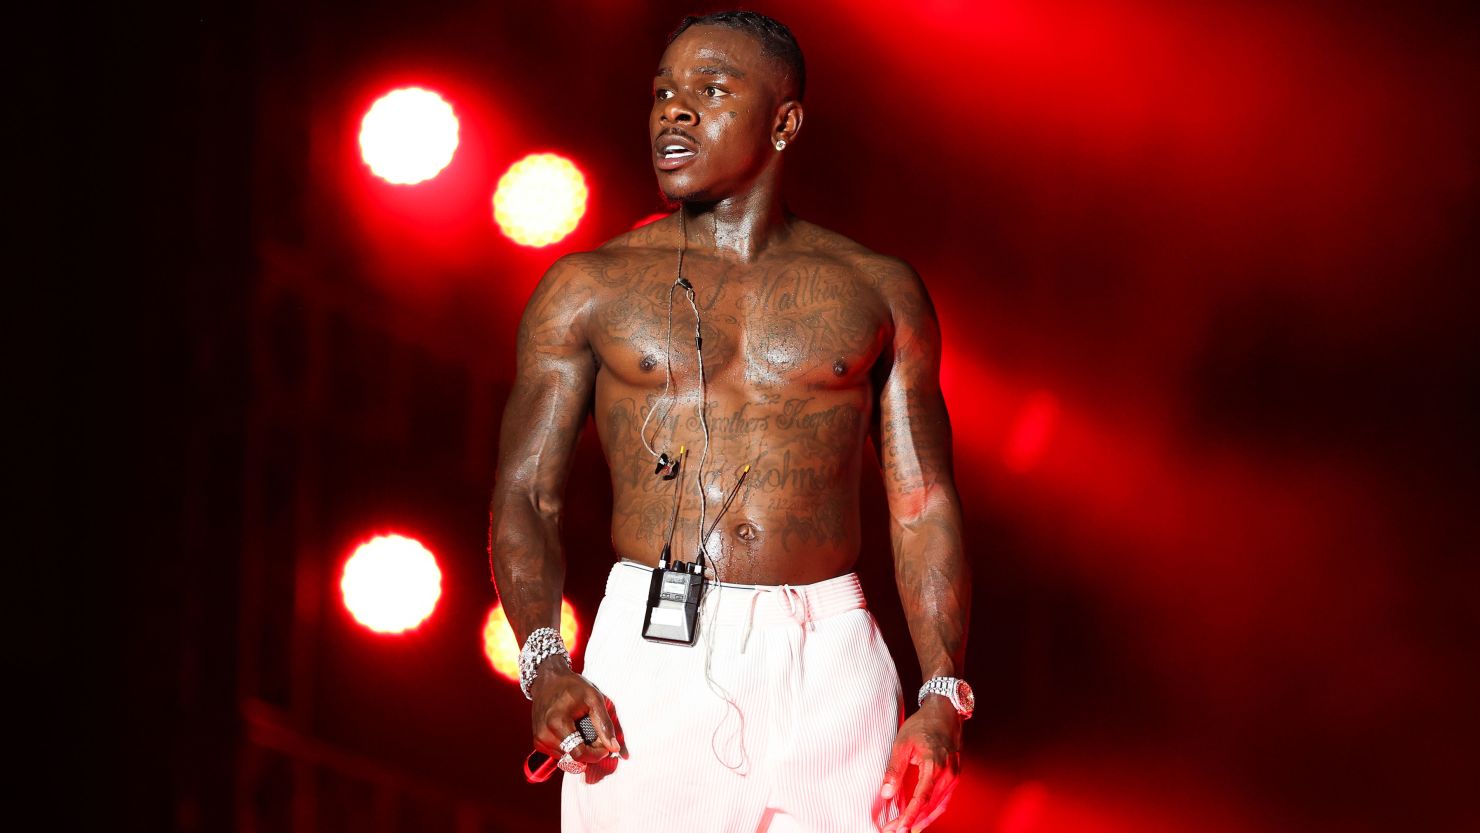 DaBaby performs on stage during Rolling Loud at Hard Rock Stadium on July 25, 2021 in Miami Gardens, Florida.